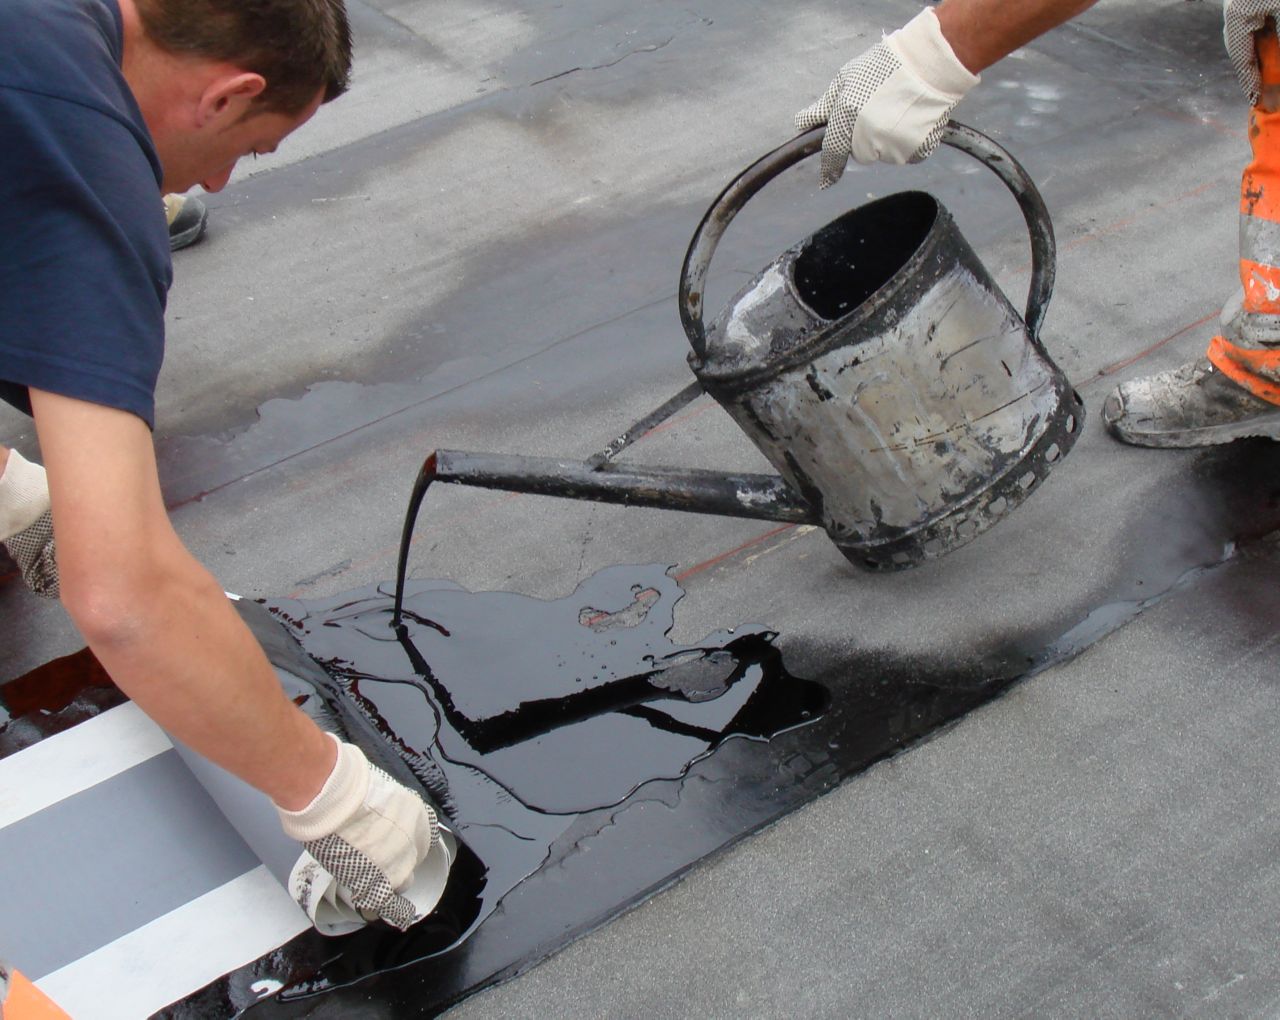 Two workers applying hot melted bitumen membrane	